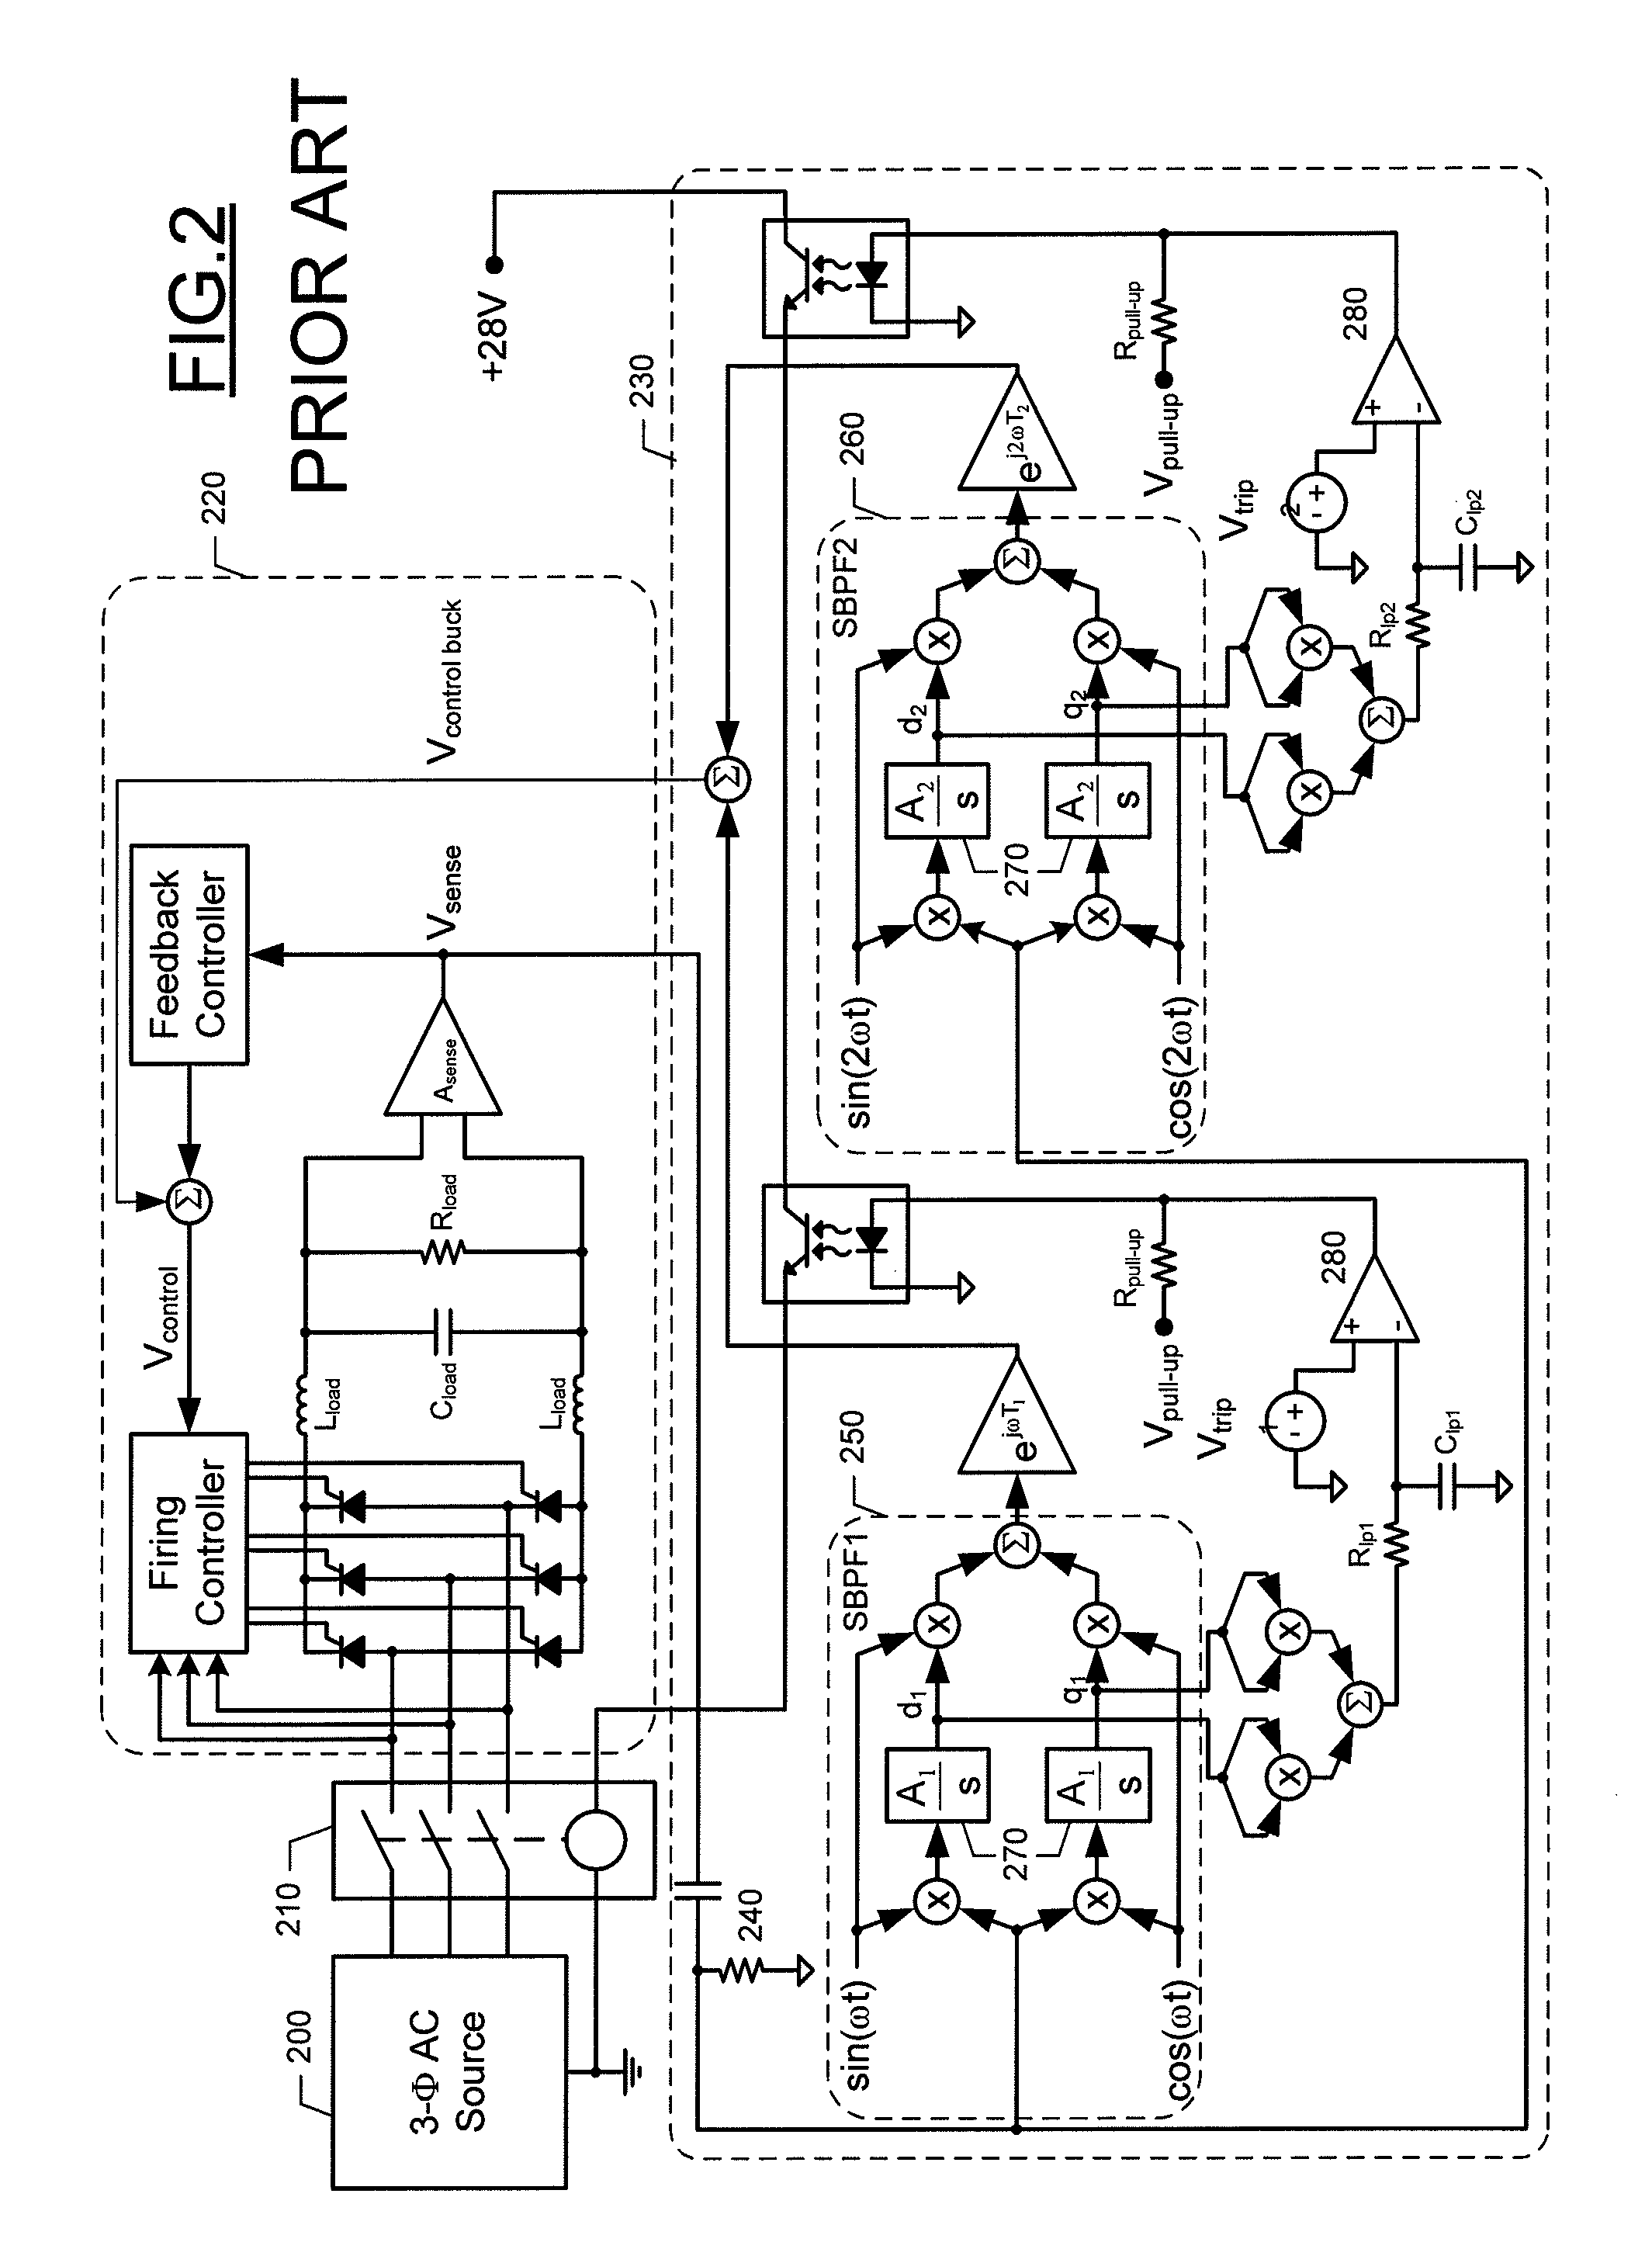 Method and apparatus for fast fault detection